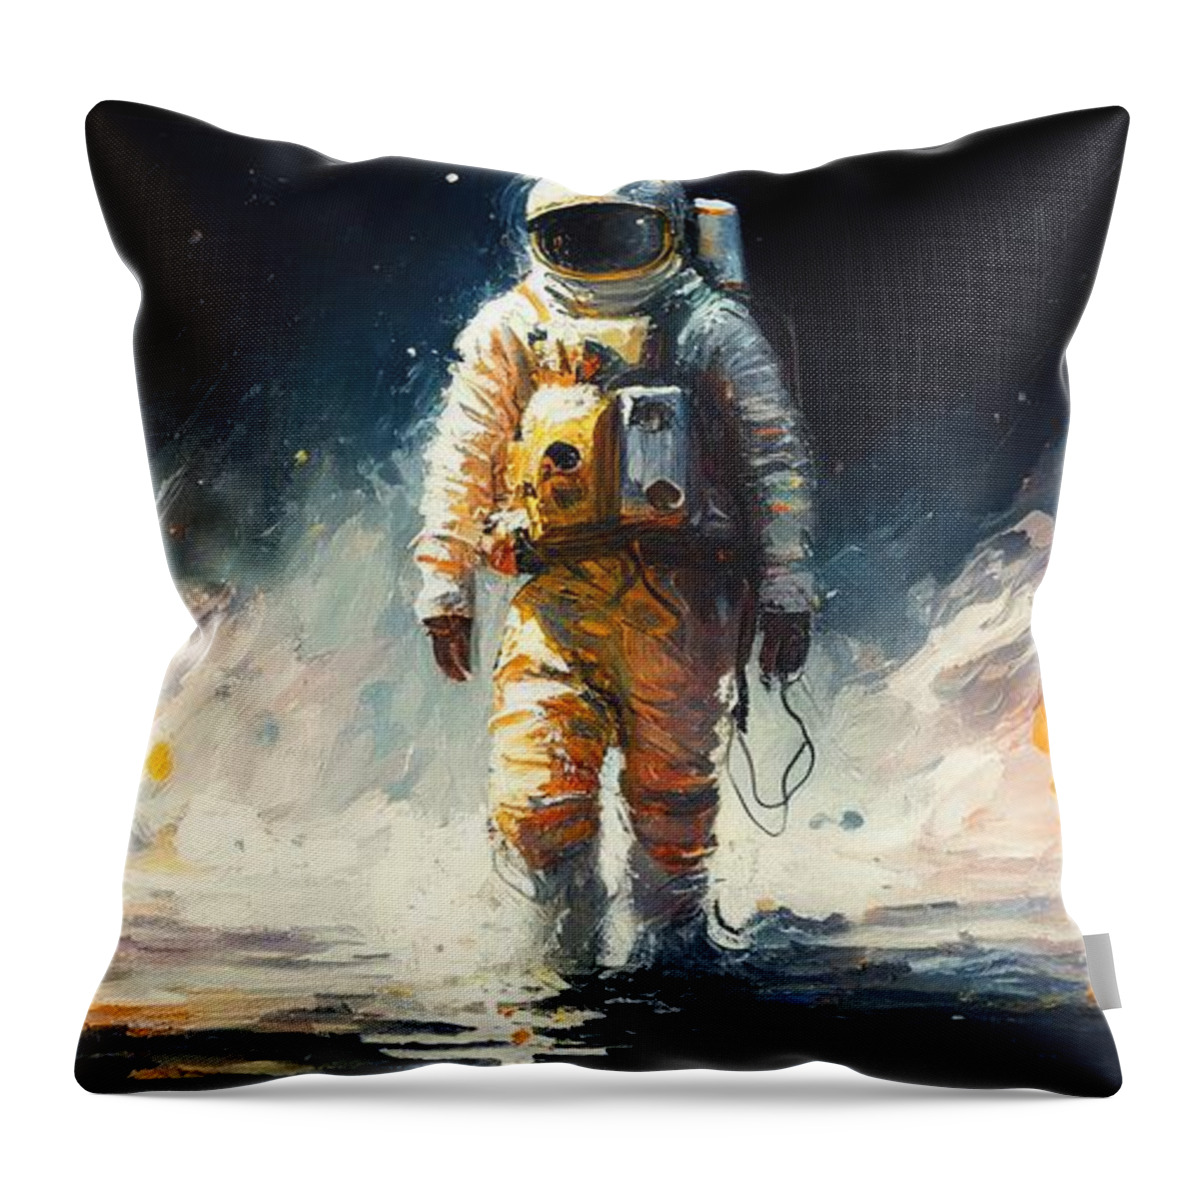 Gateway Throw Pillow featuring the painting Strange Worlds by My Head Cinema